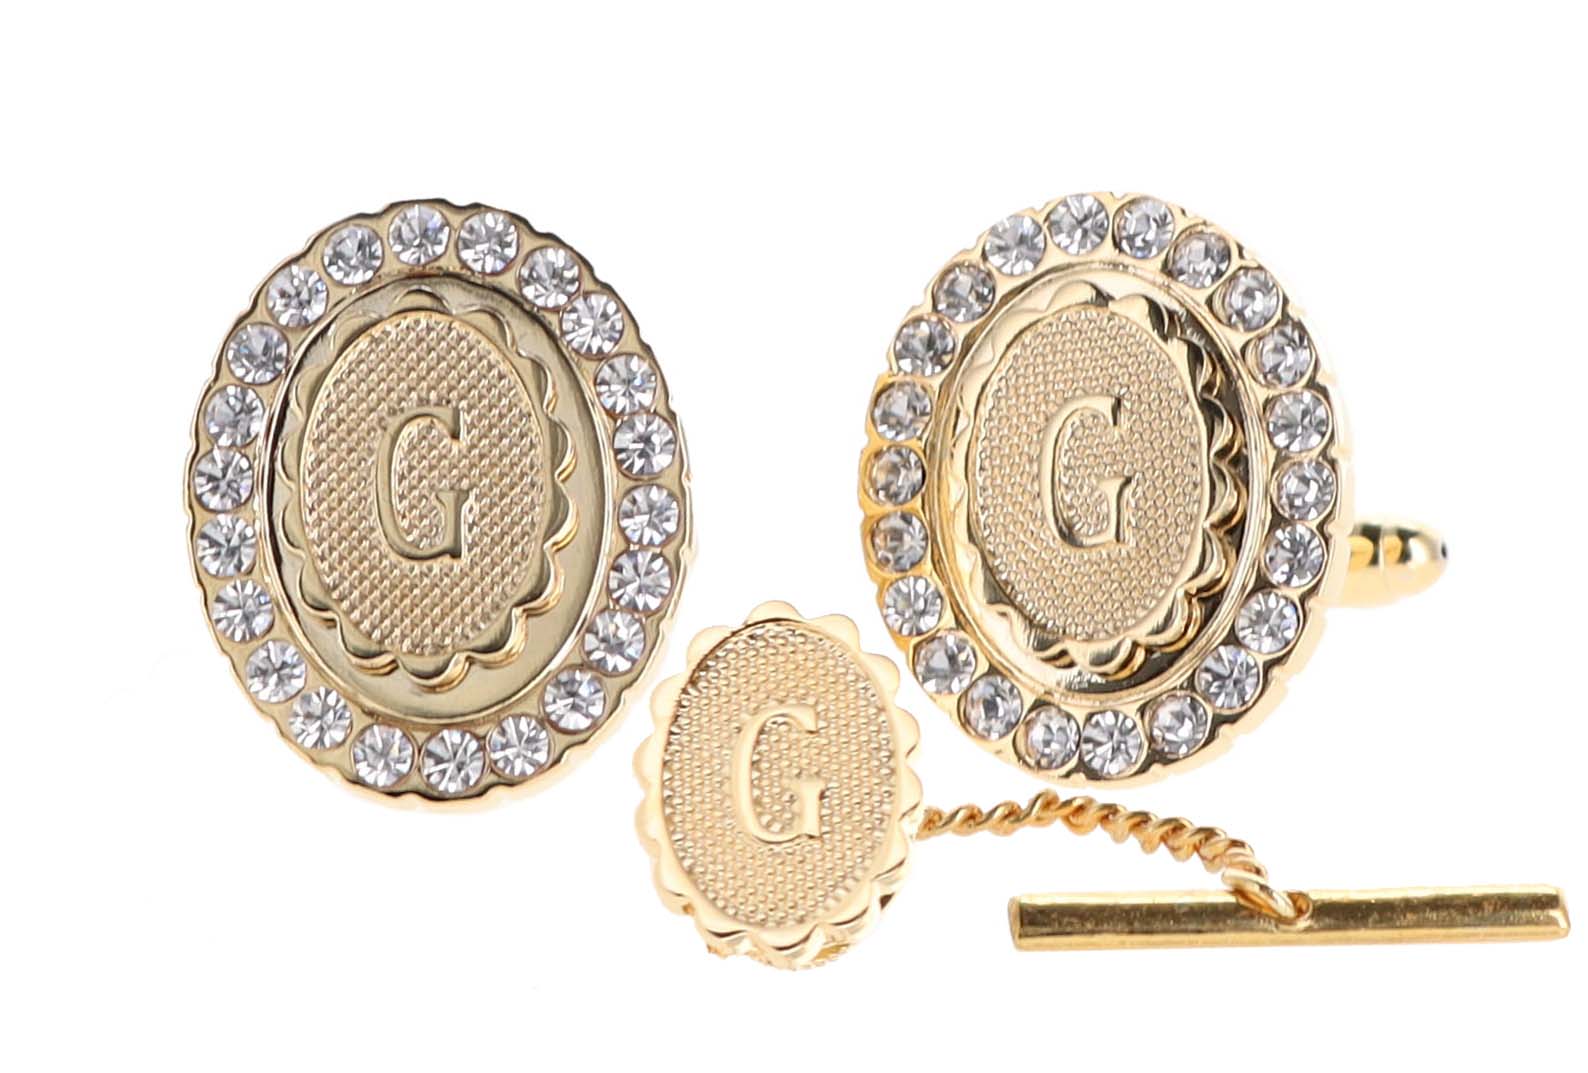 Vittorio Vico Bling Initial Cufflinks & Tie Tack Set: A to Z